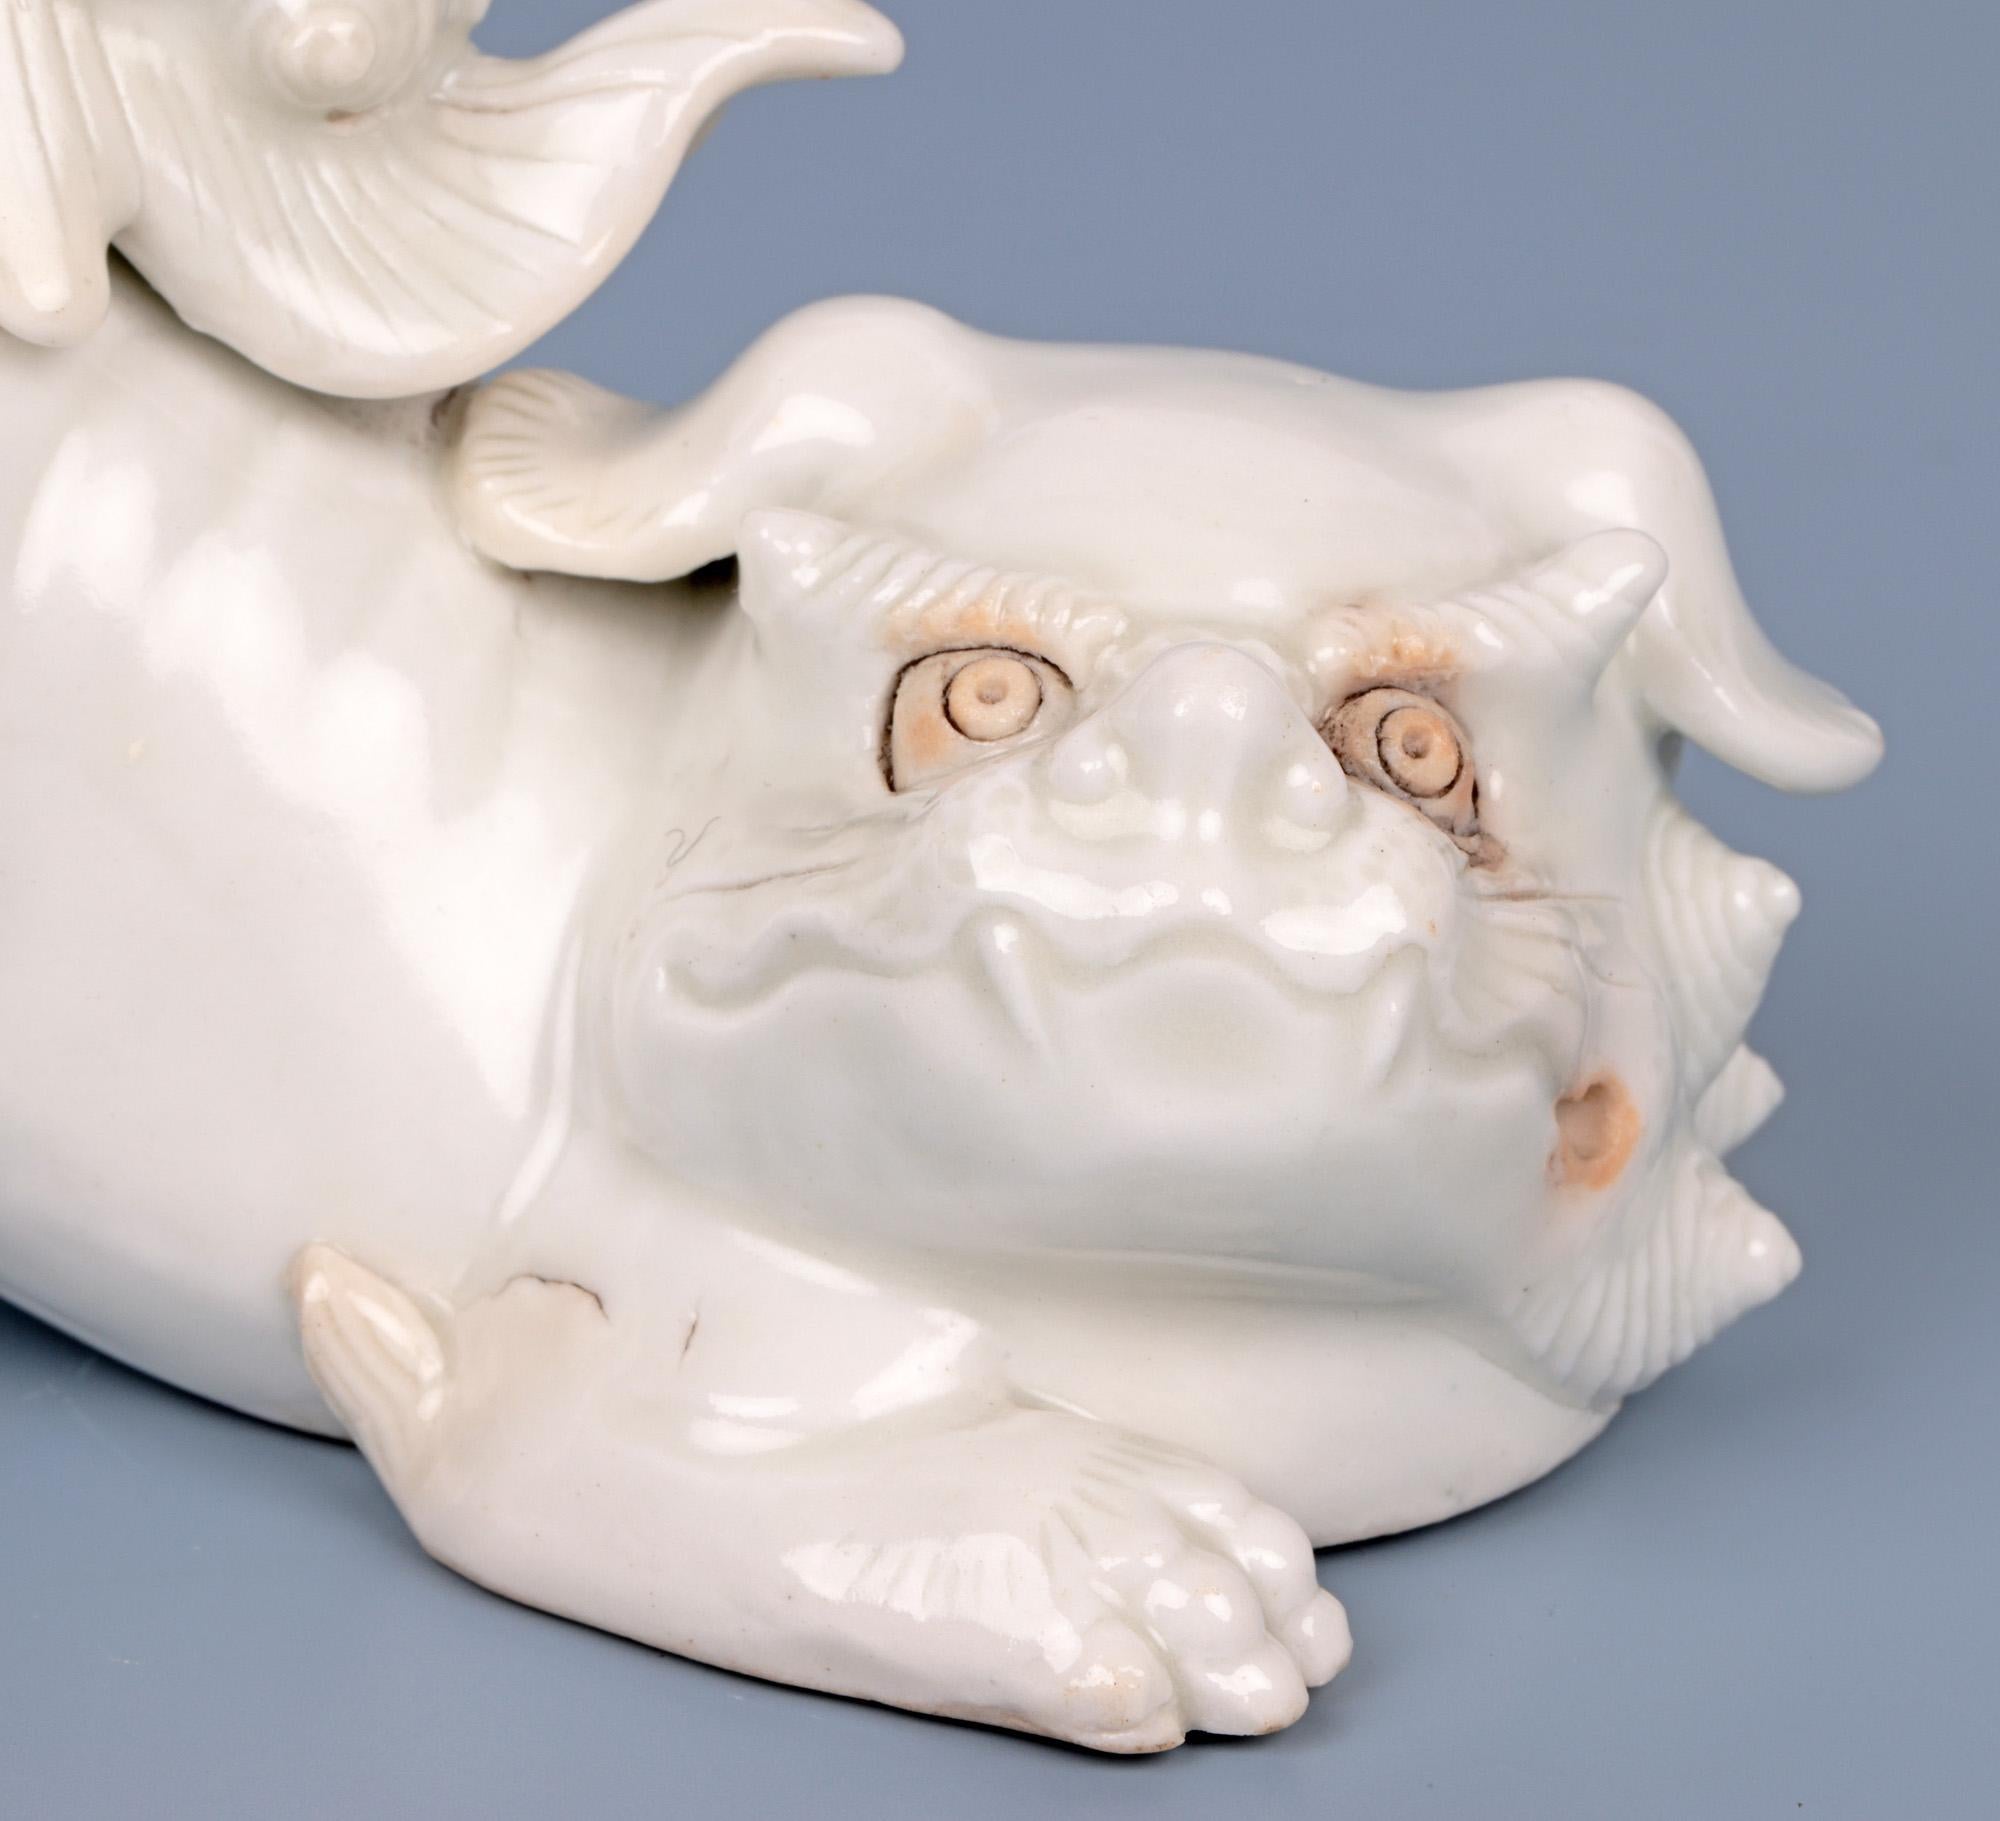 A stylish Japanese Meiji Hirado porcelain figure of a Shishi dating from the early 19th century. The well modelled and detailed figure rests its head on its front paws with its head turned to one side and with its rear legs raised in a playful pose.